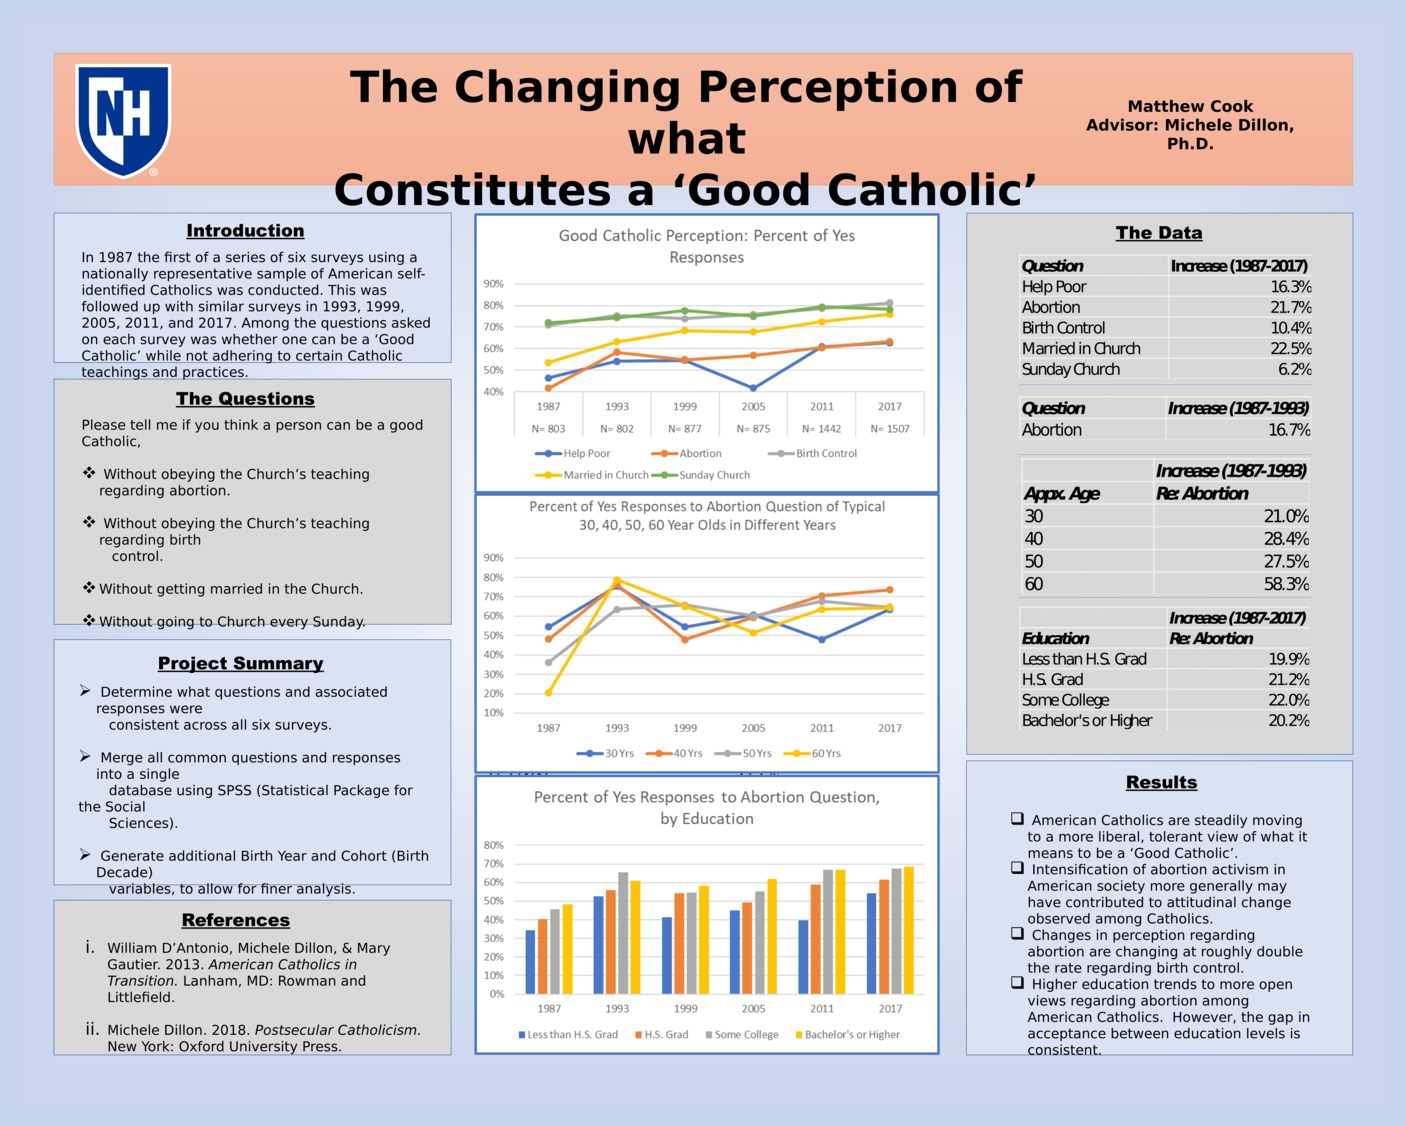 The Changing Perception Of What Constitutes A 'Good Catholic' by mcc1052